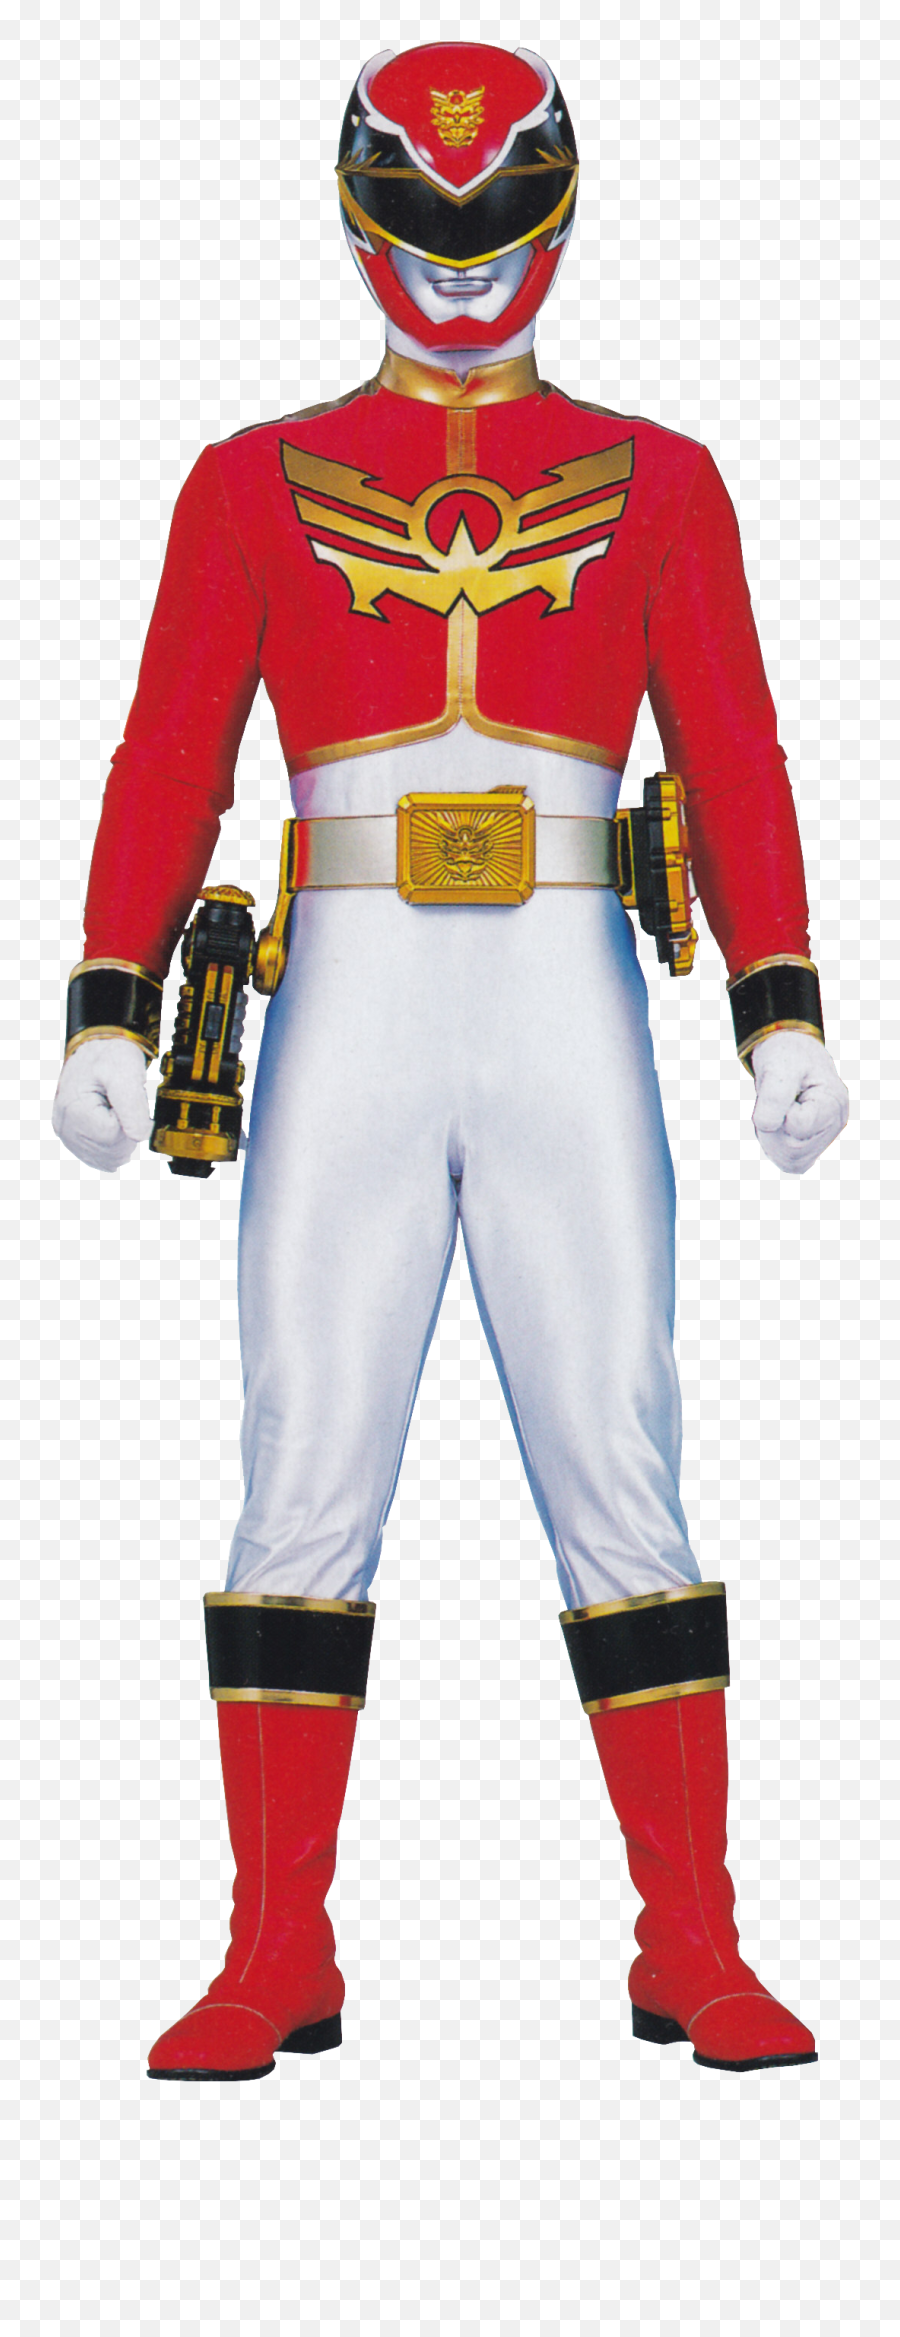 Red Power Ranger Png Picture - Power Rangers Megaforce Negro,Red Power Ranger Png